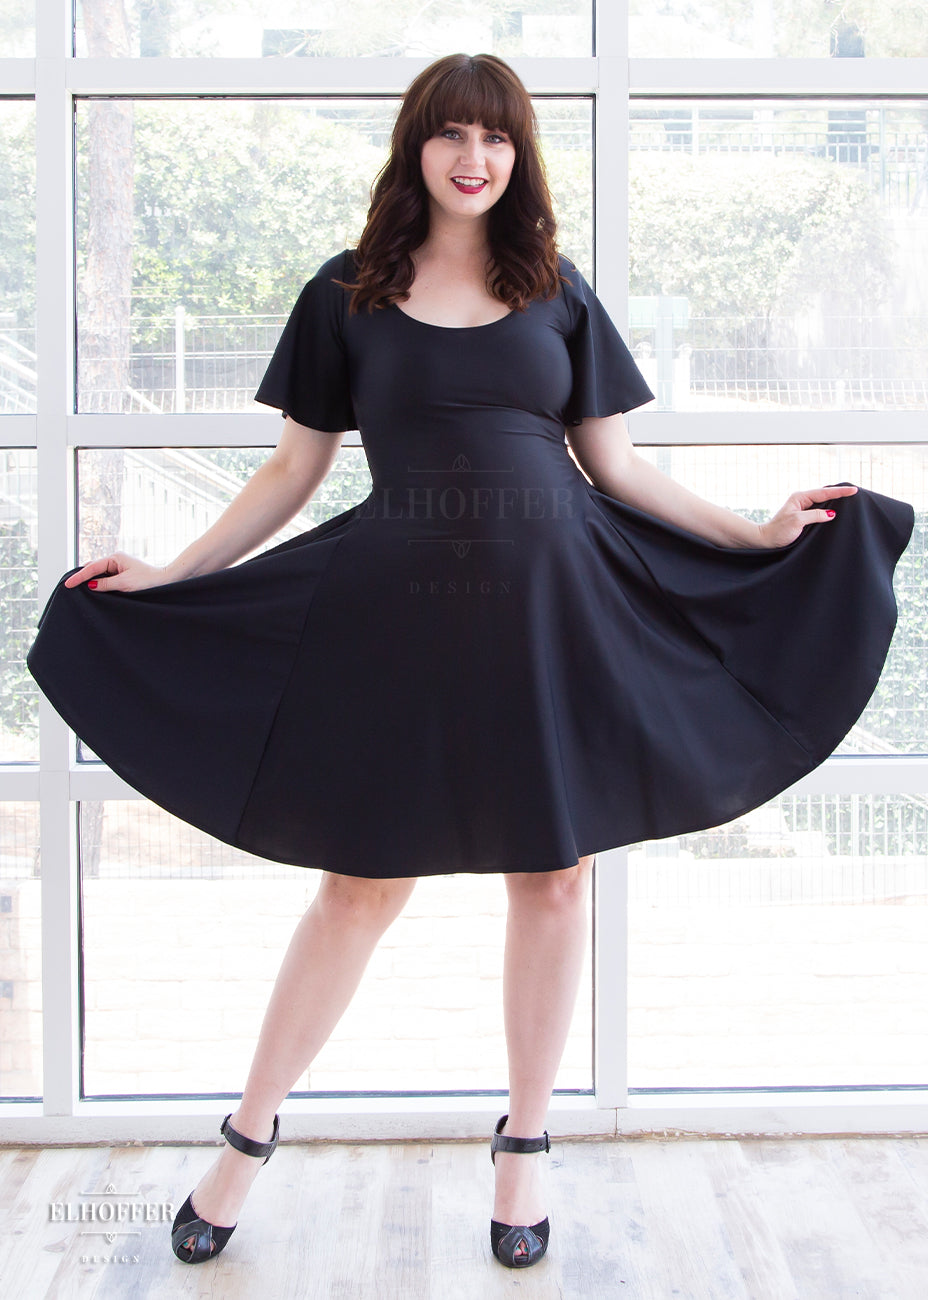 Dayna, a fair skinned medium model with long dark brown hair and bangs, is wearing a knee-length pullover dress with scoop neck, flutter sleeves, and side pockets in black. She's showing off the amount of fabric in the skirt.